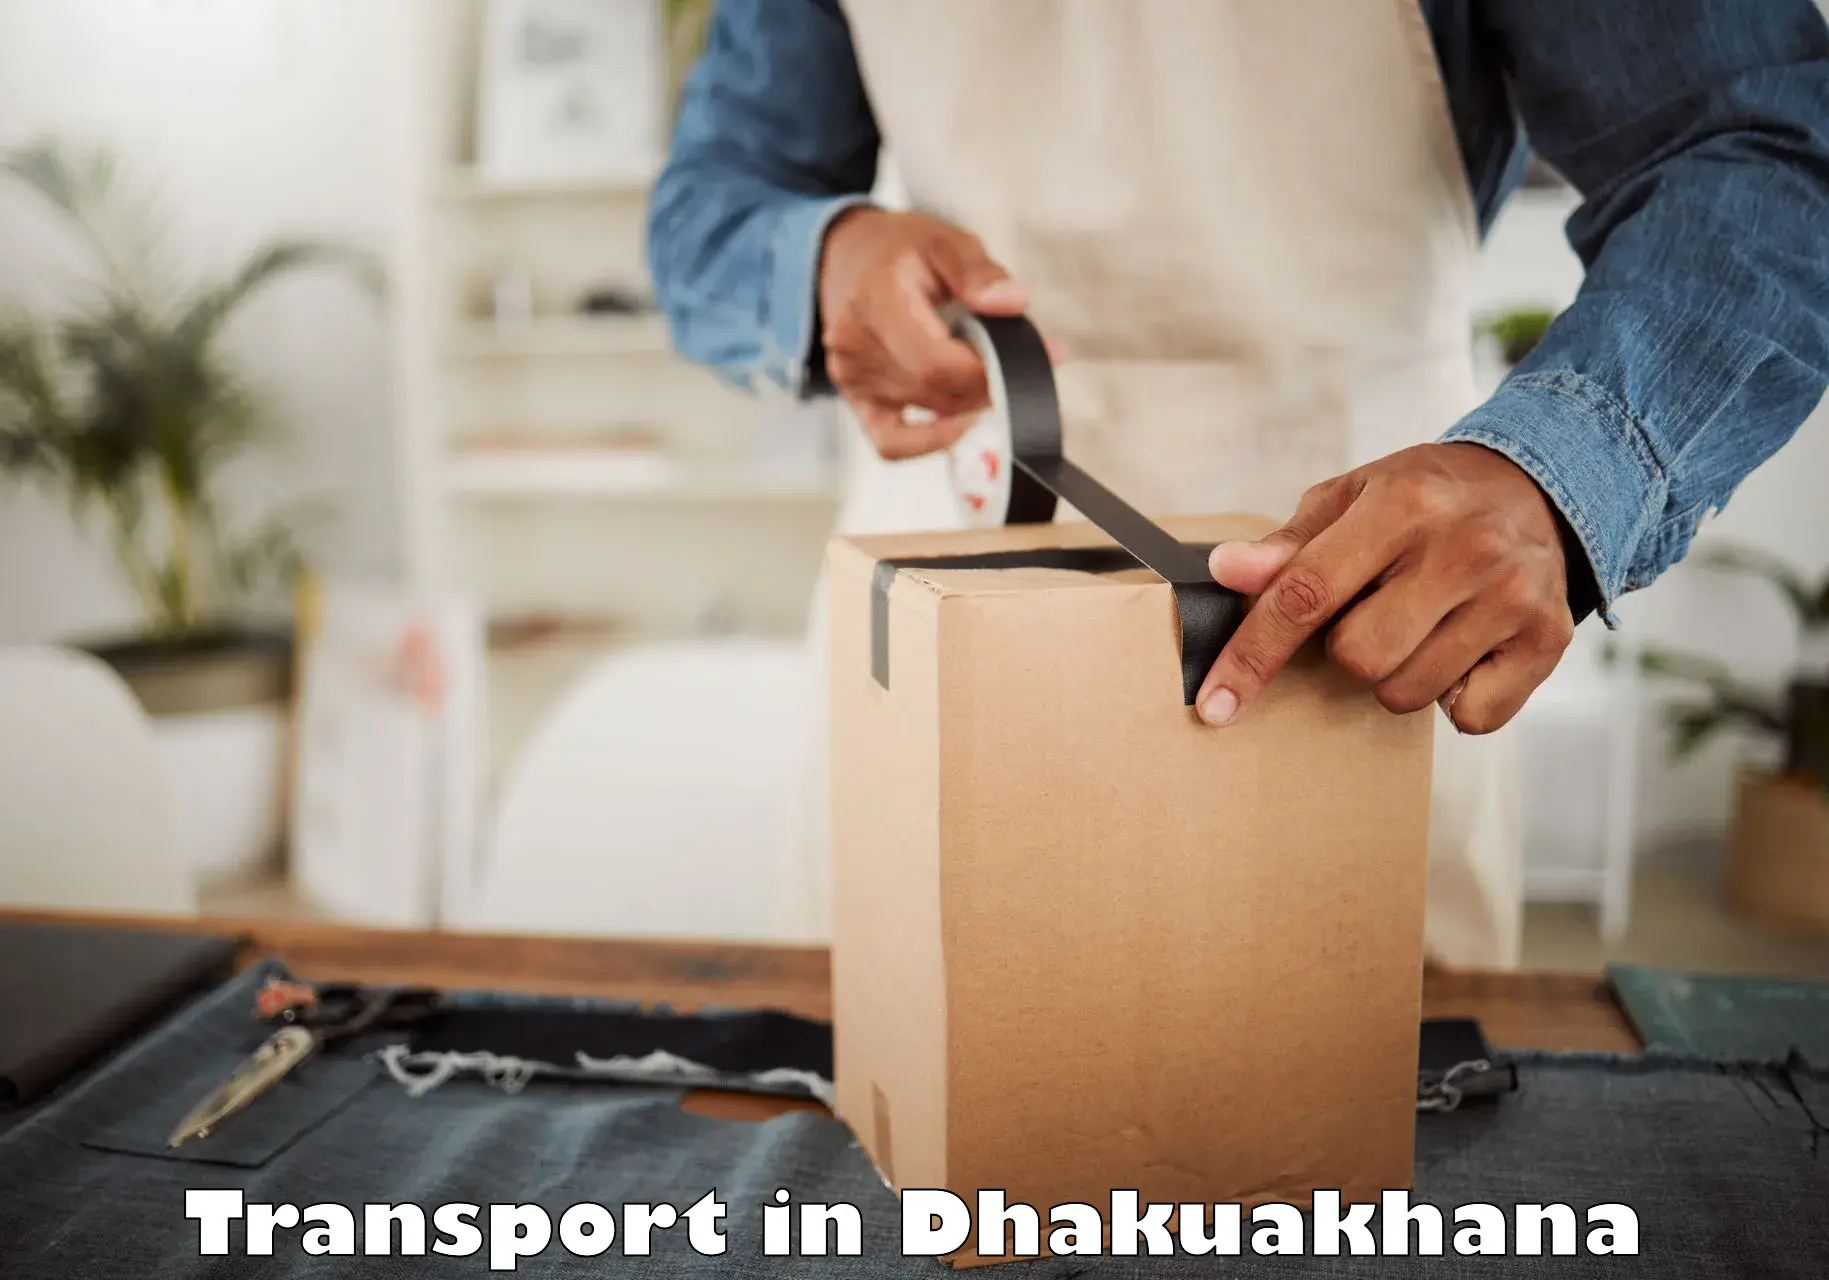 Air cargo transport services in Dhakuakhana